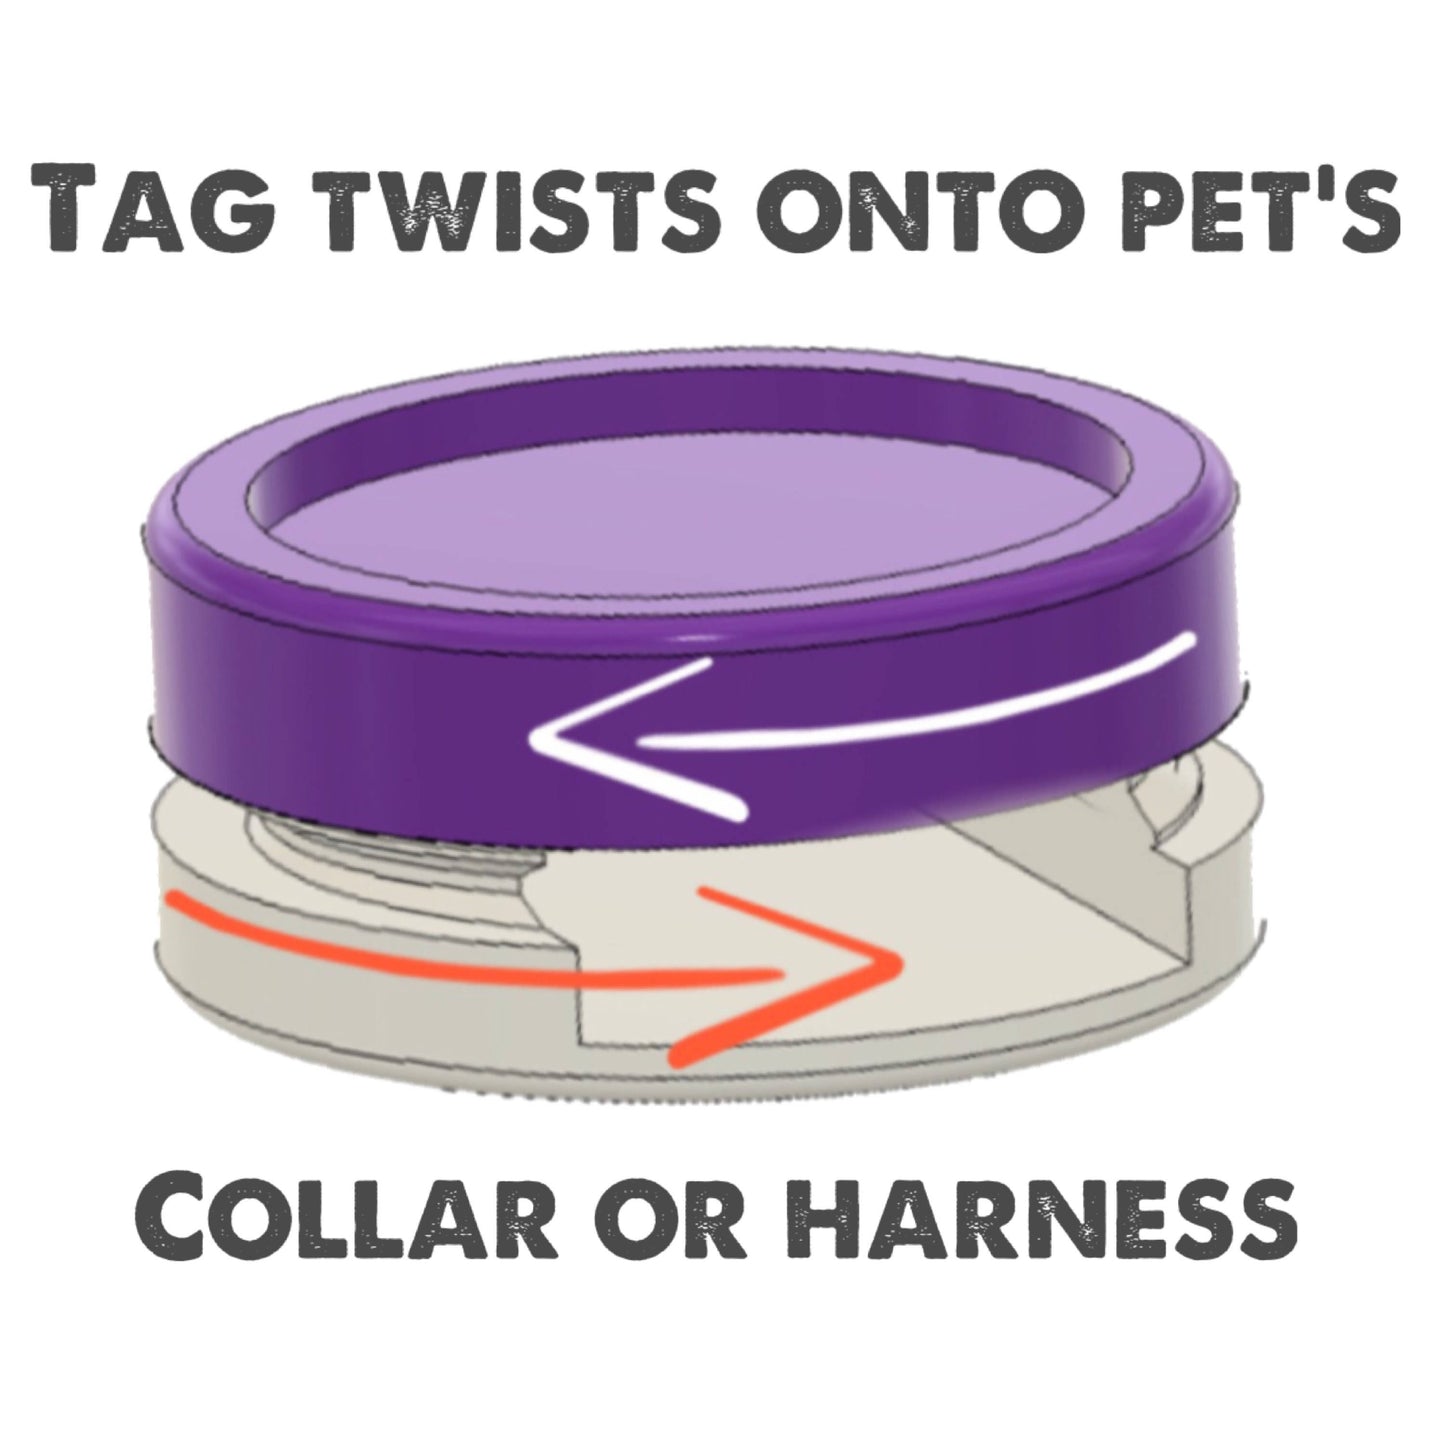 Boho Arrows TWIST TAG- Silent, Eco-Friendly, Ringless ID Tag for Cats and Dogs.